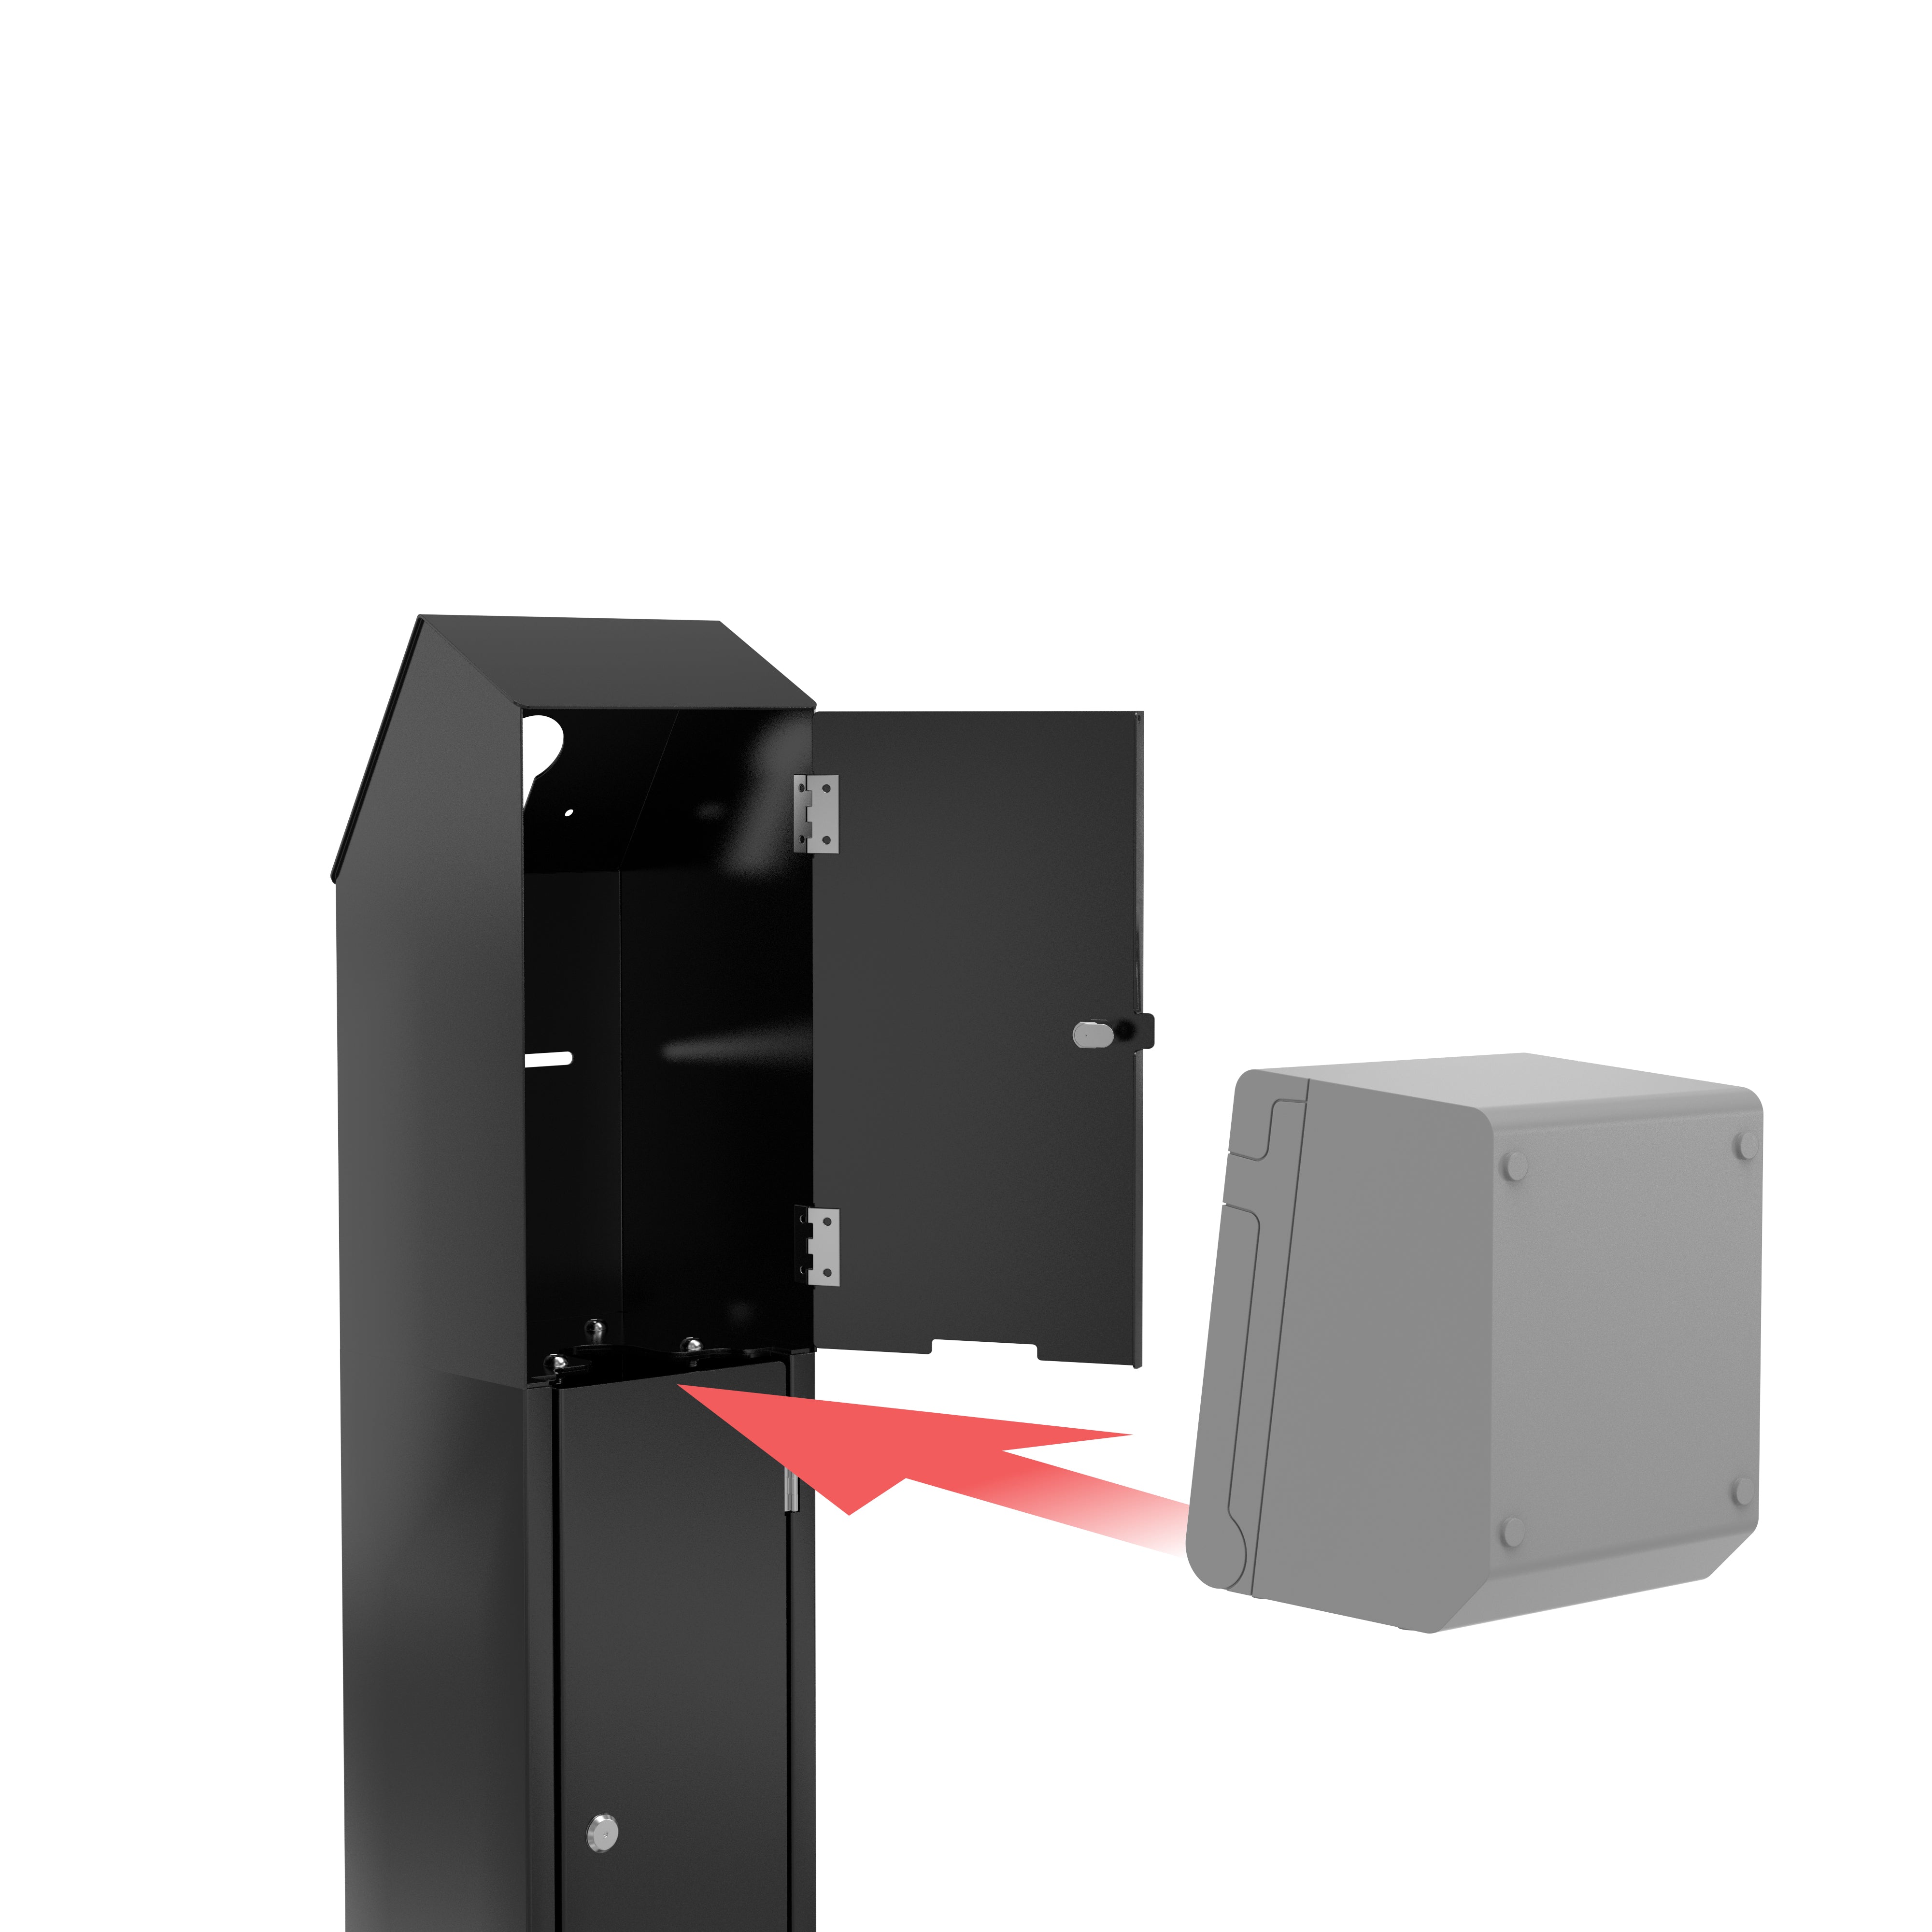 Premium Locking Floor Stand Kiosk with Universal Security Enclosure, Storage & Cable Management